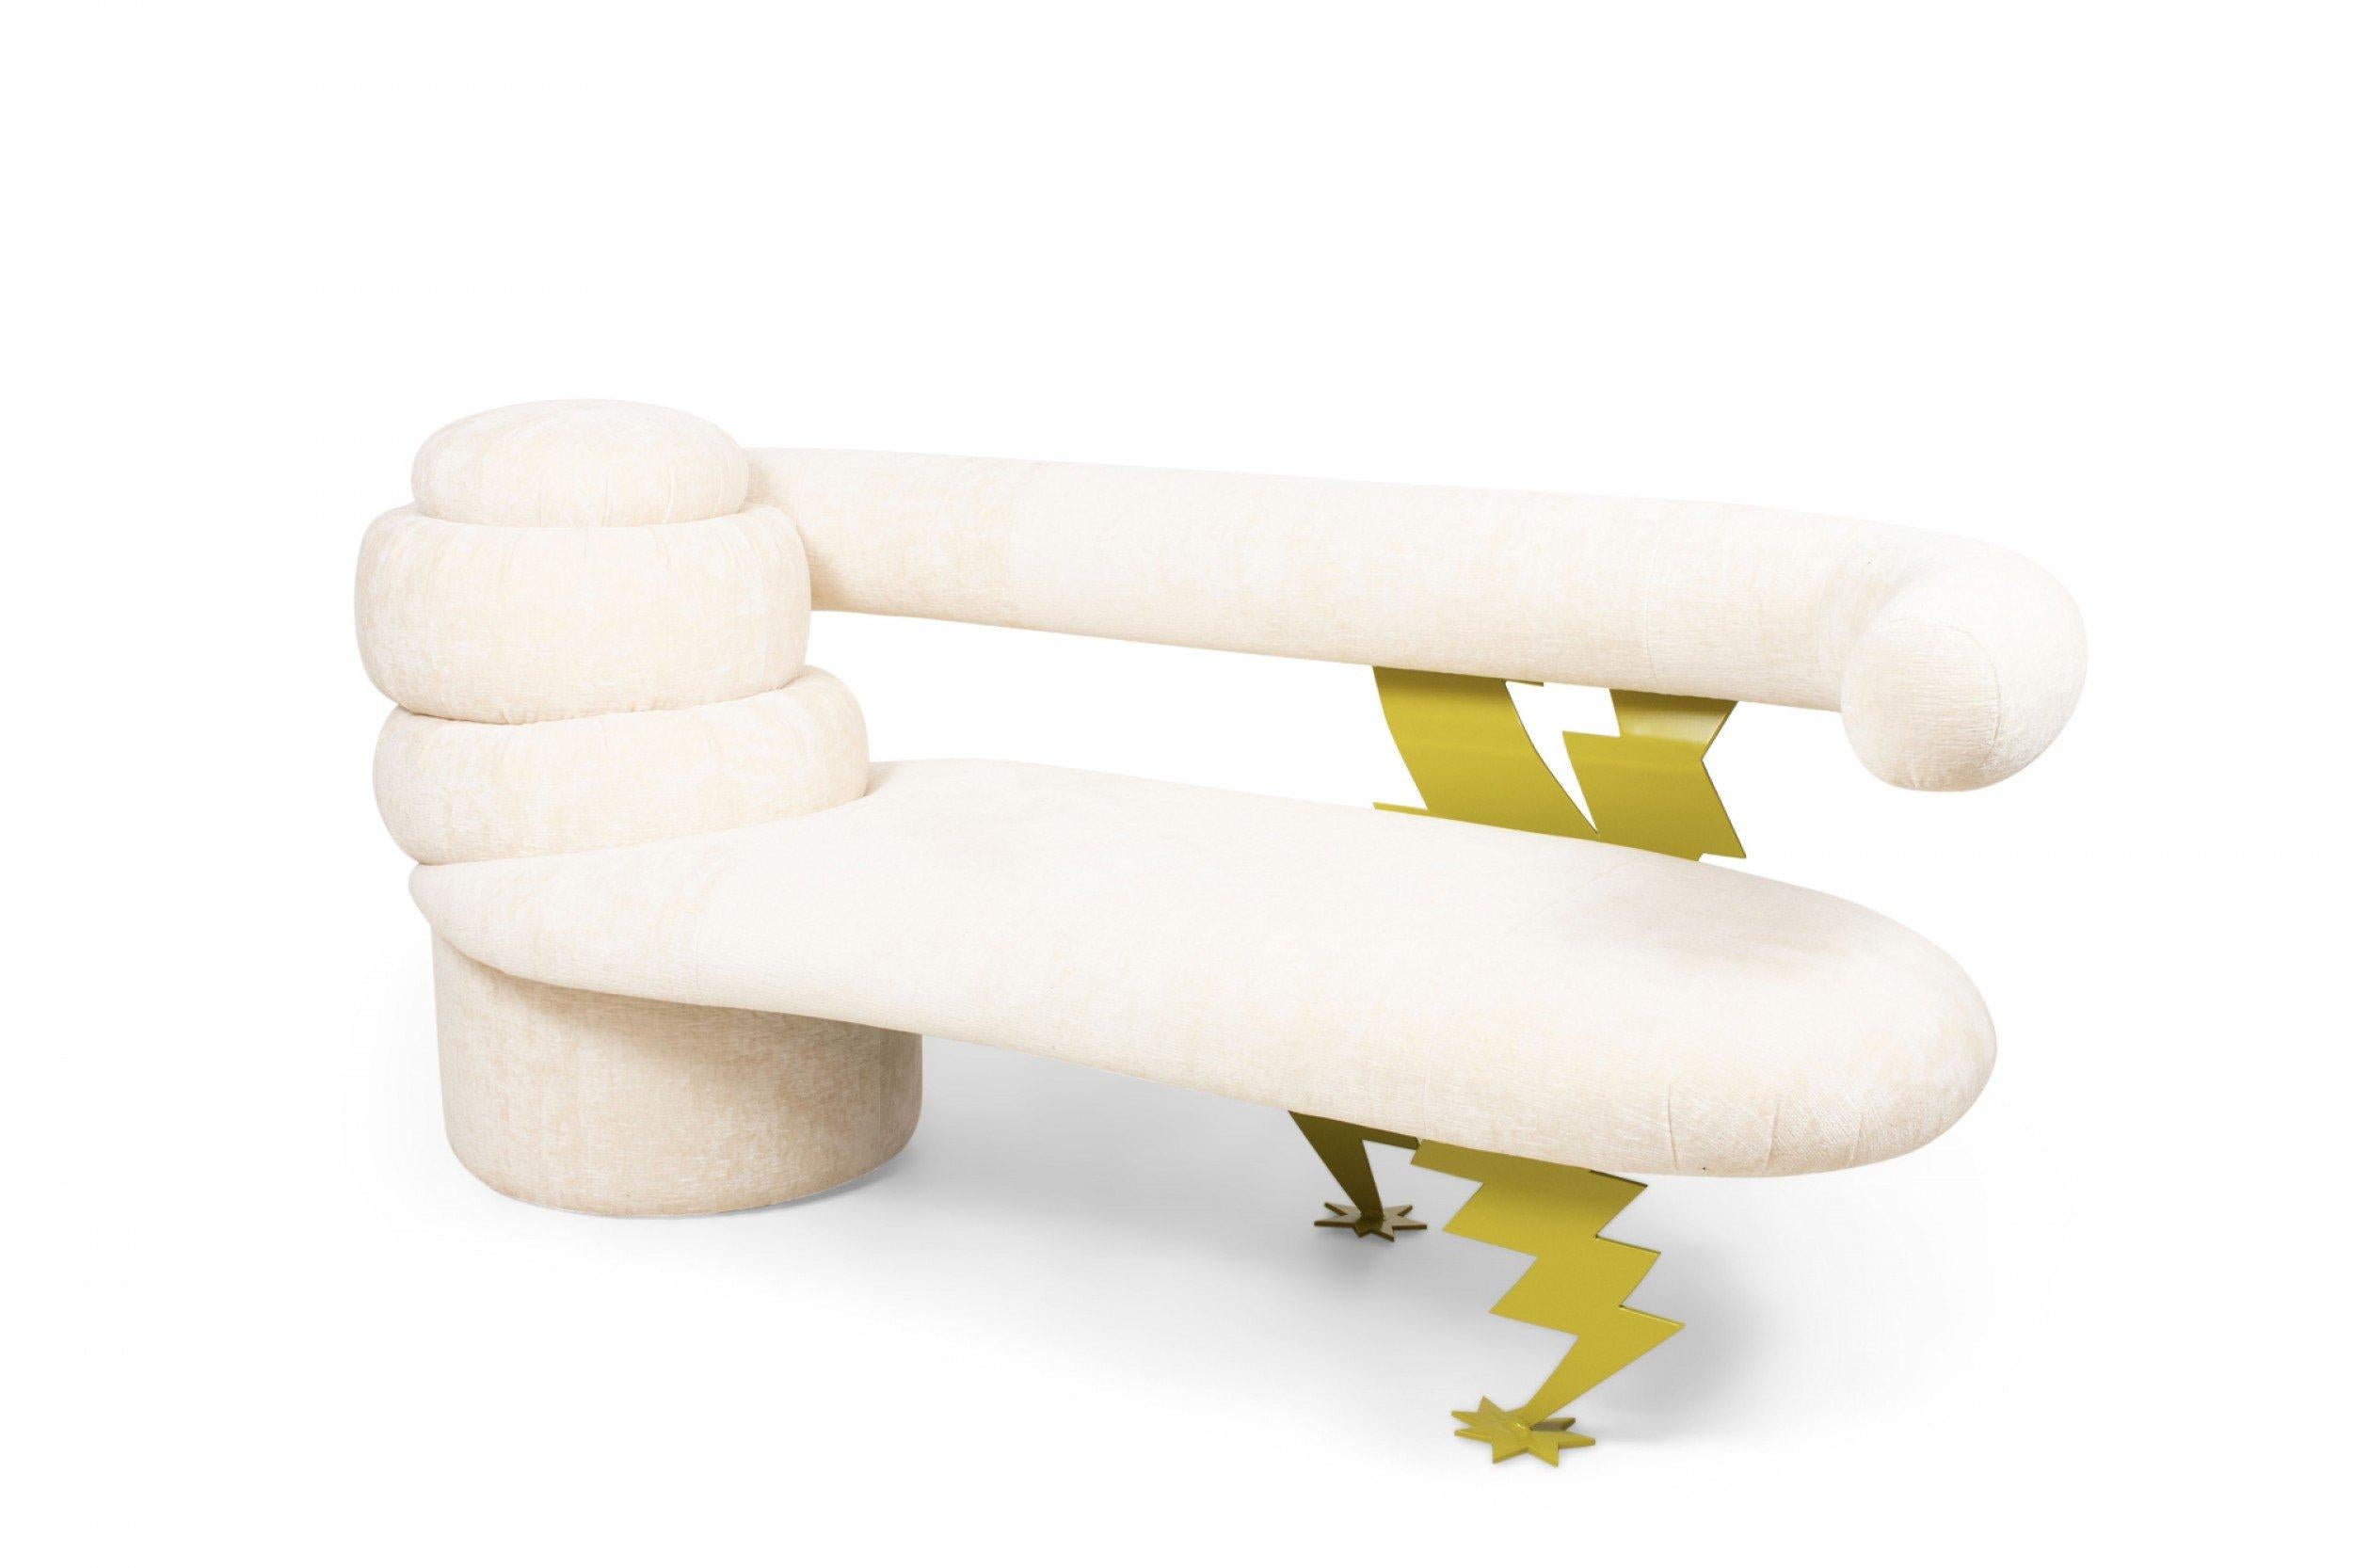 Vintage Memphis-style (1980s) beige textured velvet upholstered bench / sofa with a circular tiered right arm extending to a curved tube back rest supported by a gold powder-coated plastic frame shaped like striking lightning bolts with spiked